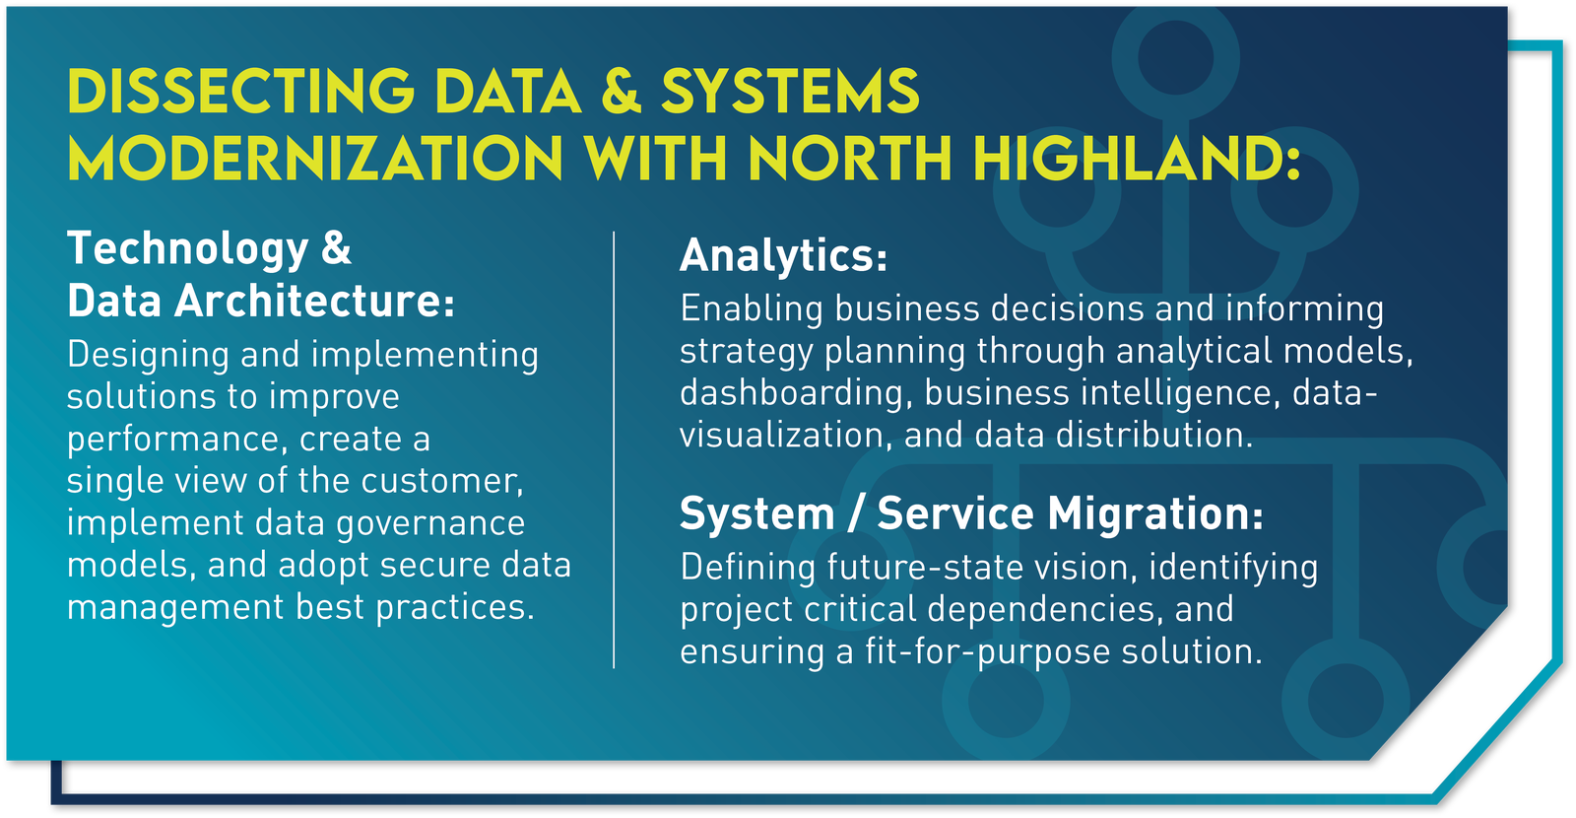 Graphic explaining data and systems mod according to North Highland